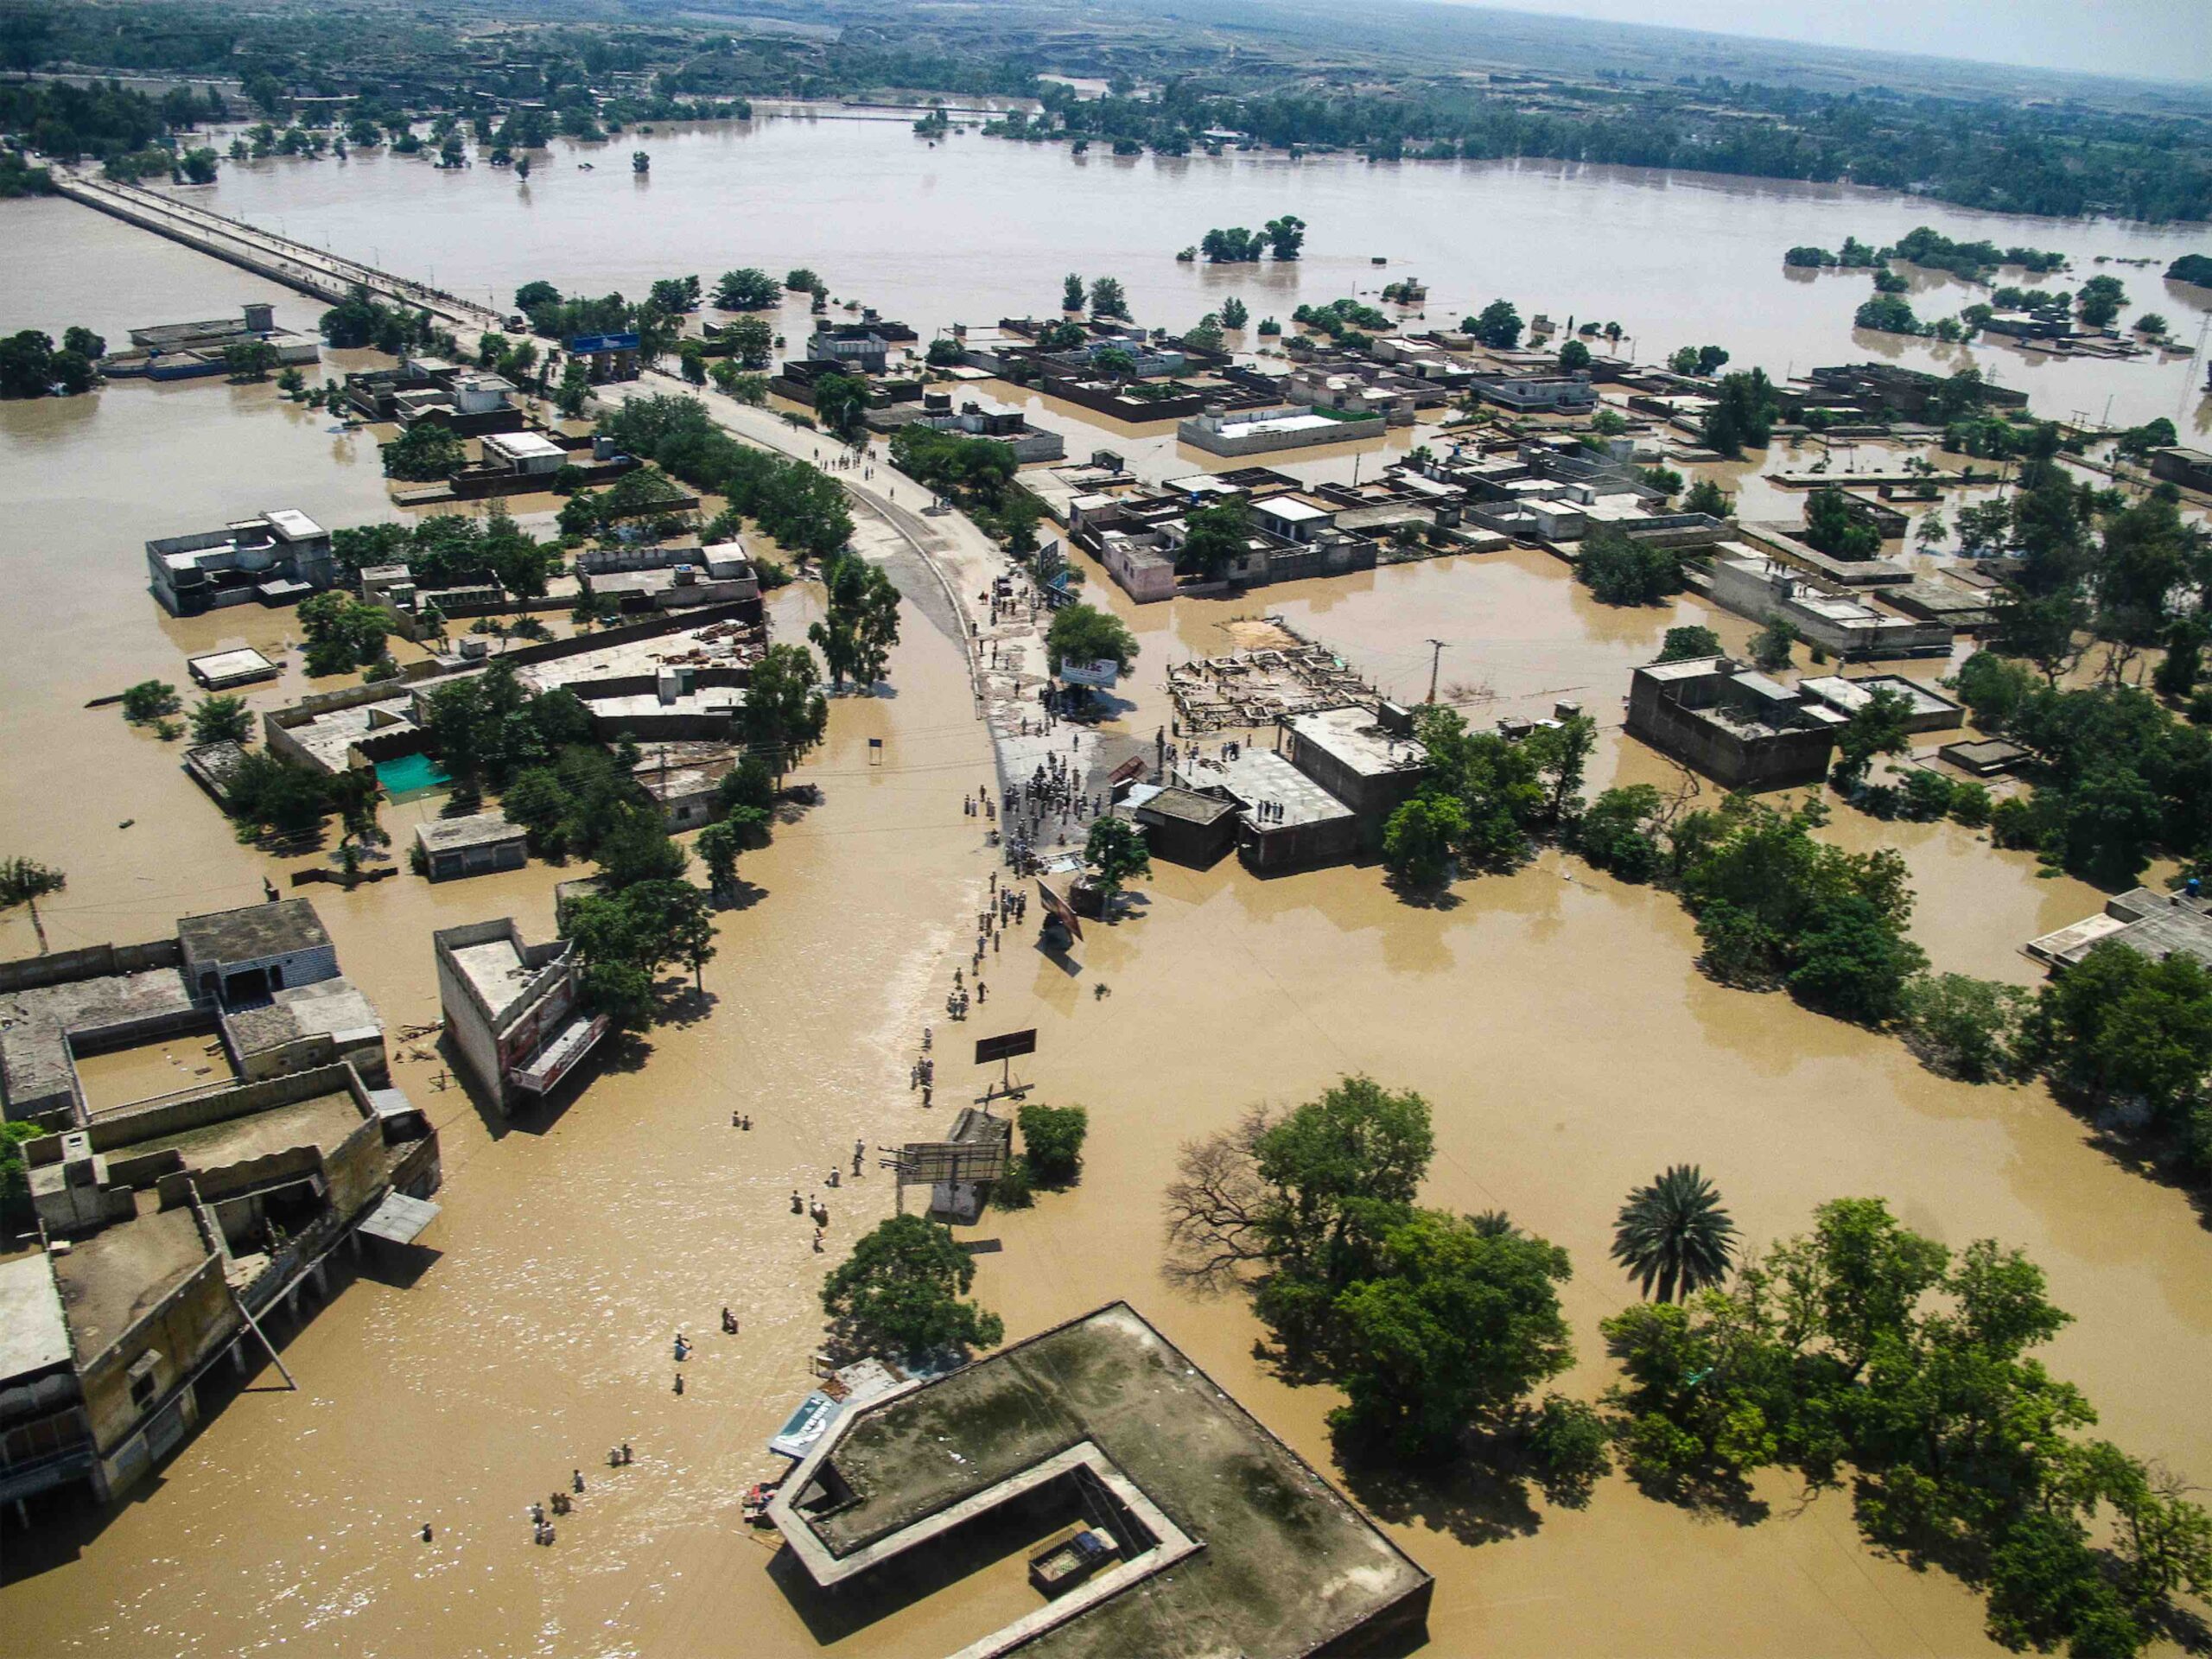 When a River Met a Nation – the Pakistan Floods